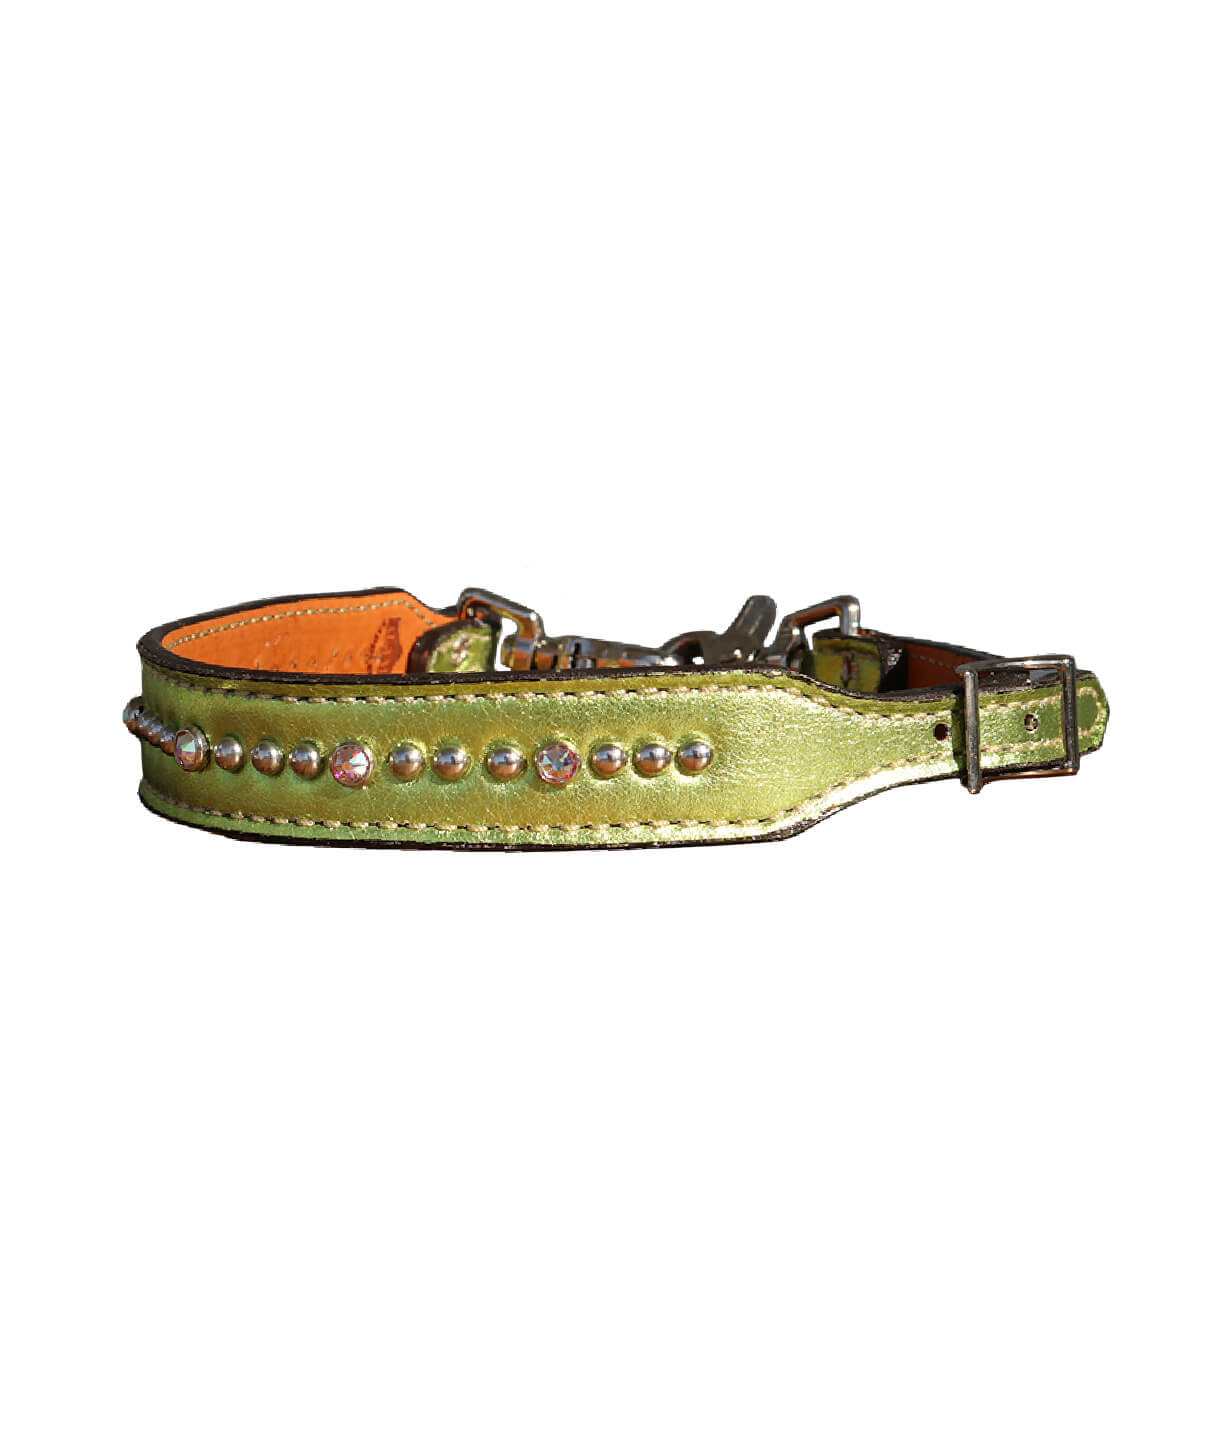 200-JL Wither strap lime green metallic overlay with crystals and spots